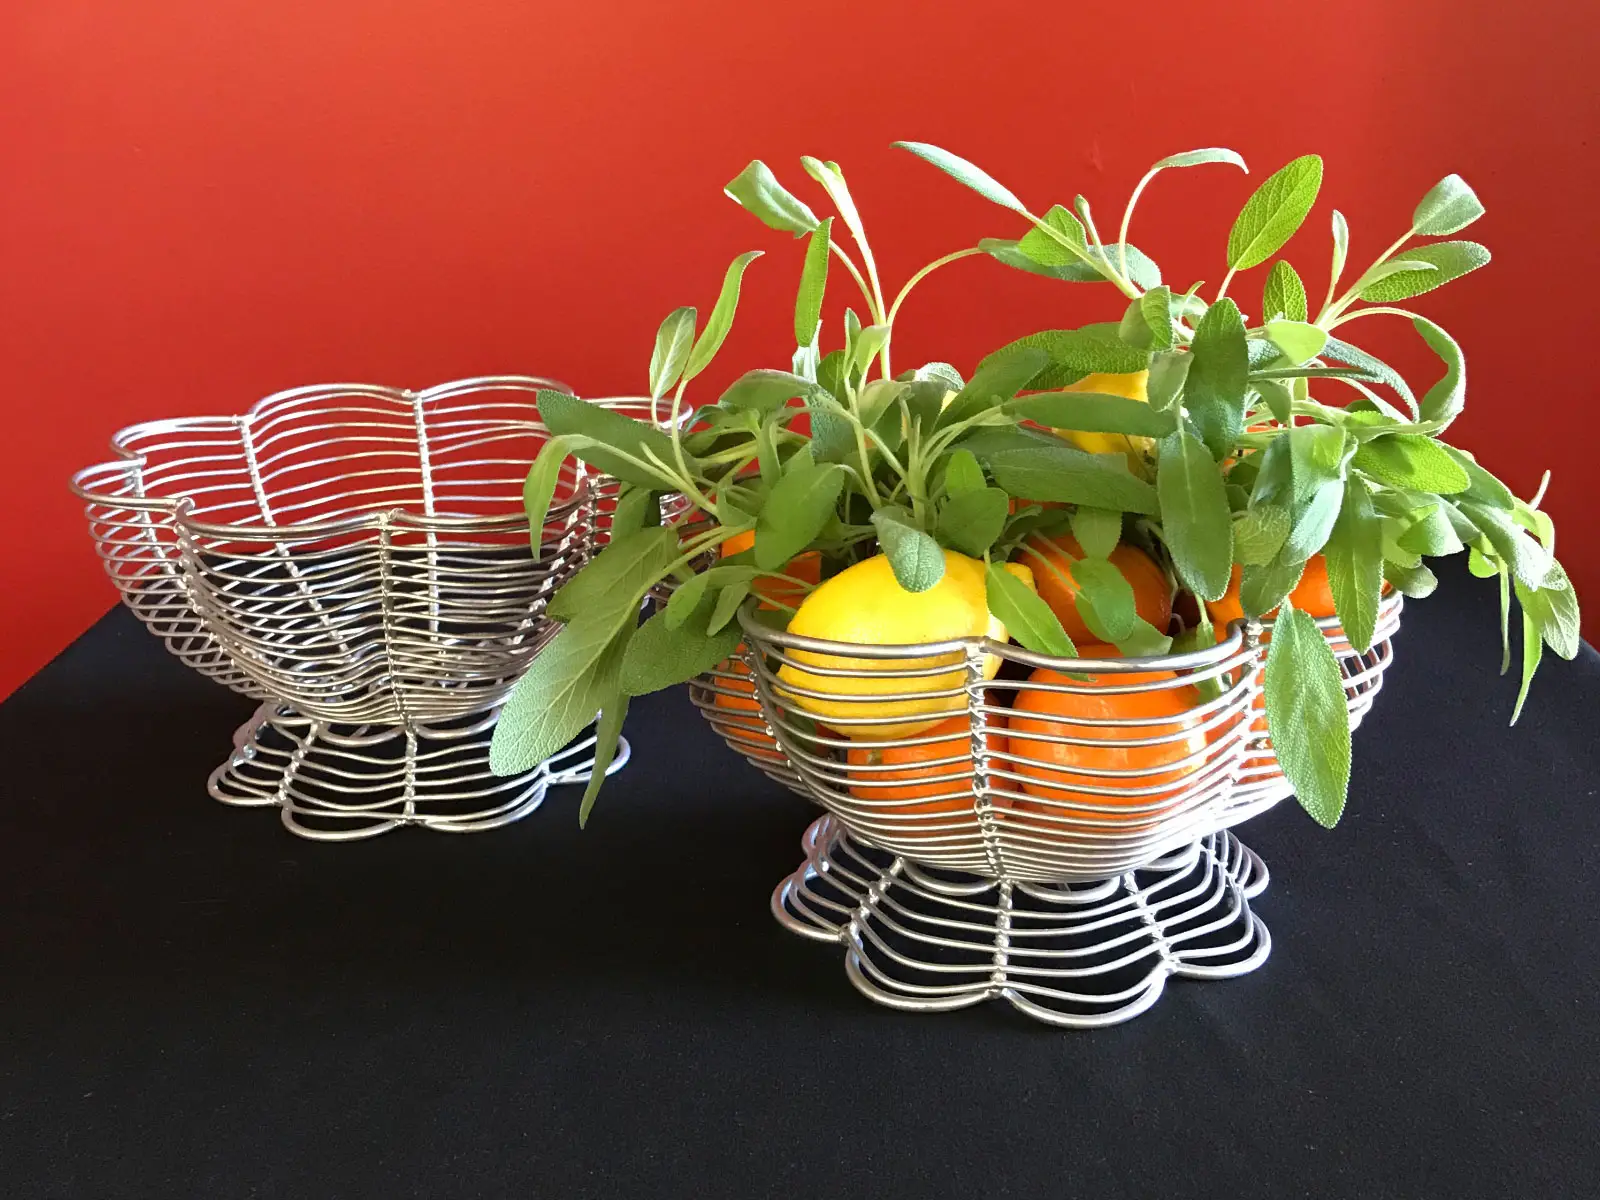 Several wax fruit centerpieces including oranges and lemons in white baskets